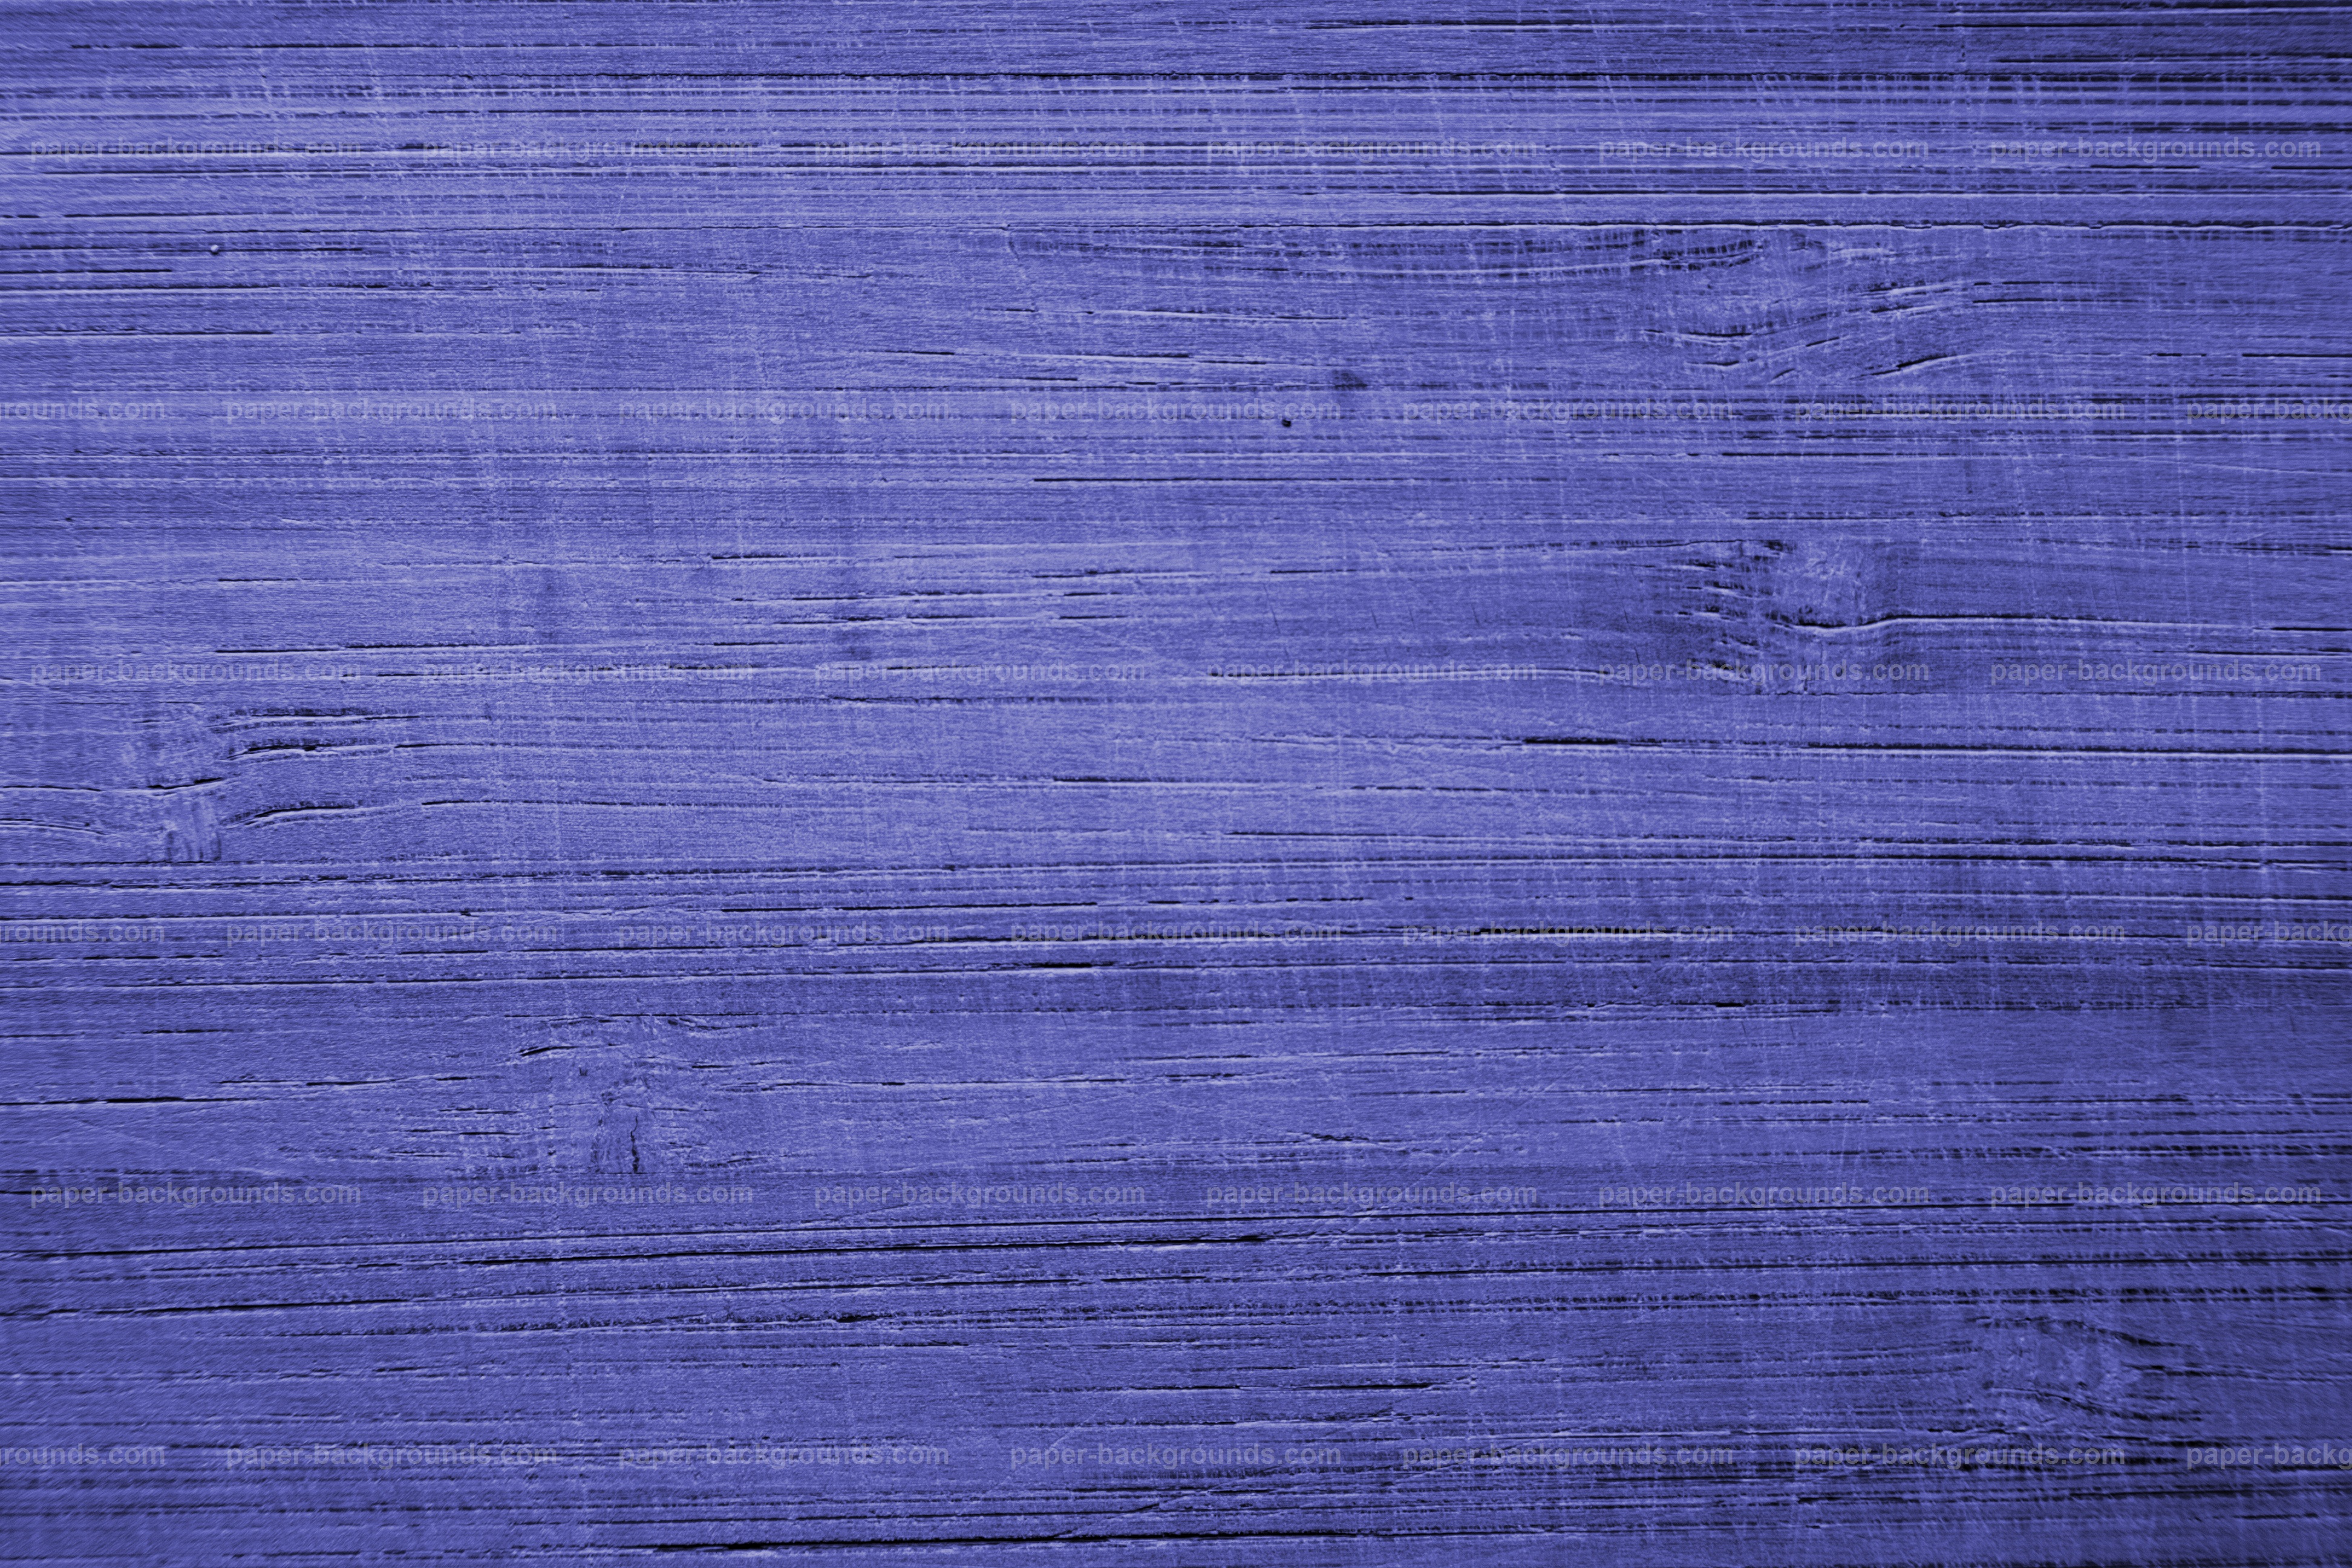 Paper Backgrounds | Blue Wood Texture Background